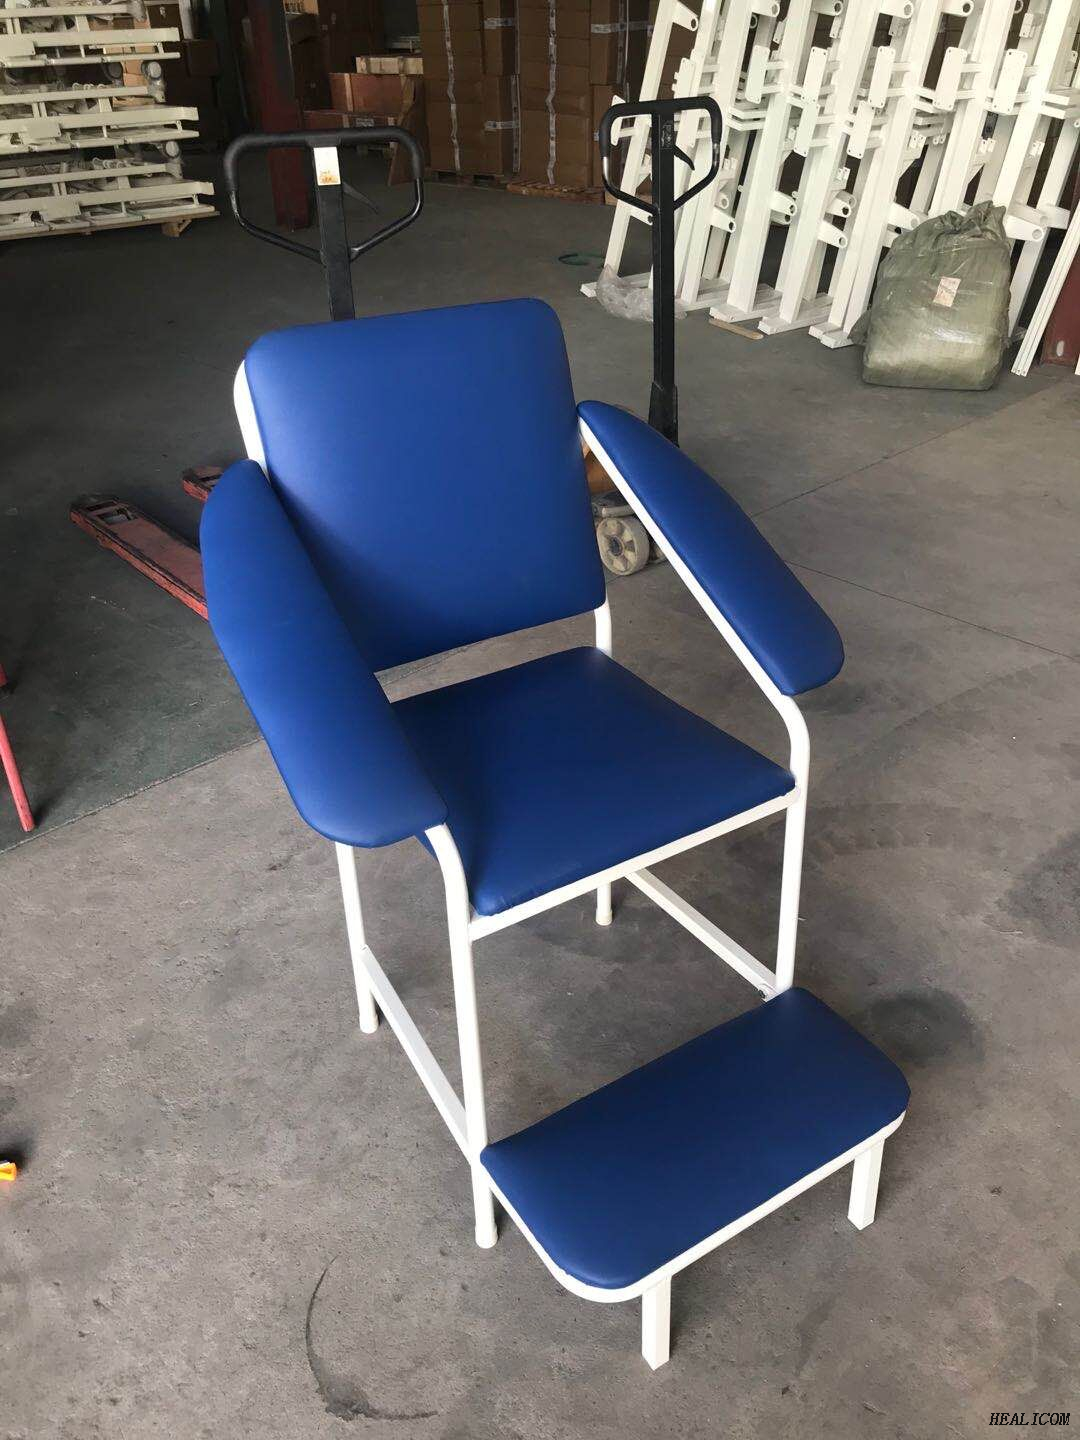 Hospital furniture mobilemblood patient medical blood collection chair